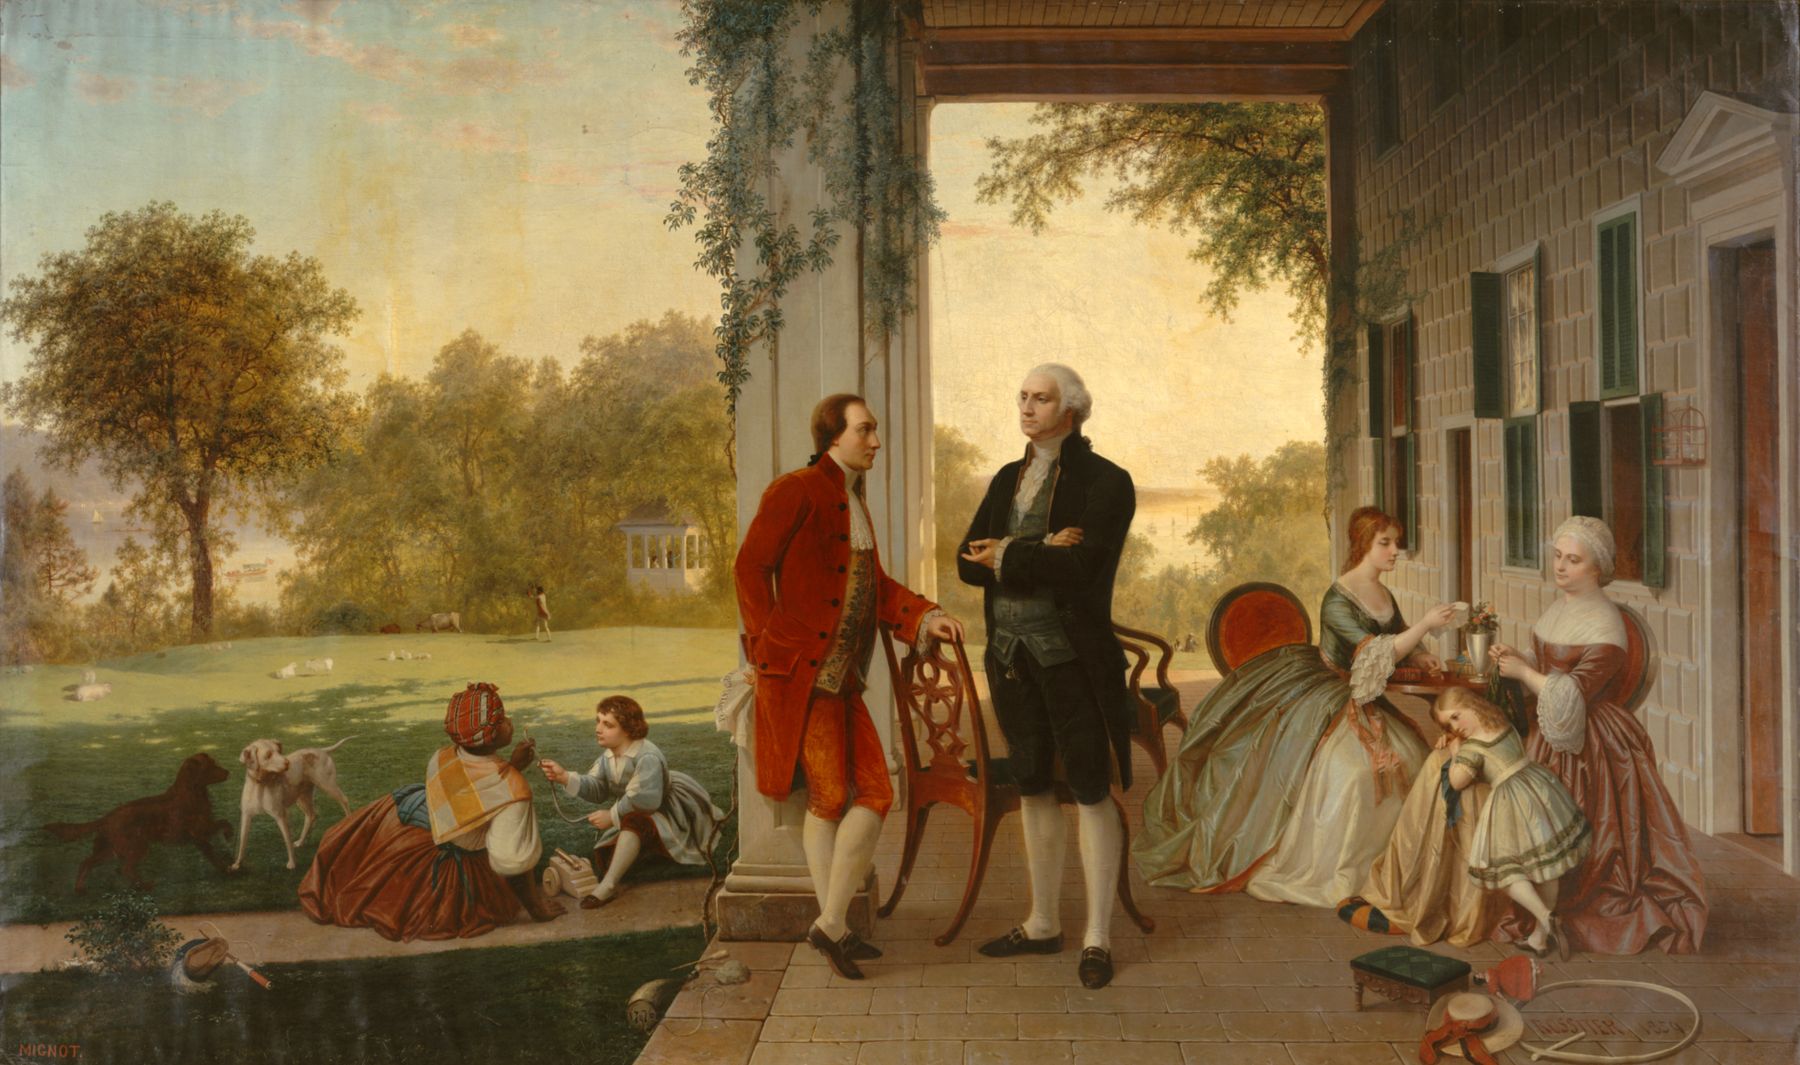 Washington and Lafayette at Mount Vernon, 1784, painted by Thomas Rossier and Louis Remy Mignot in 1859. Metropolitan Museum of Art.